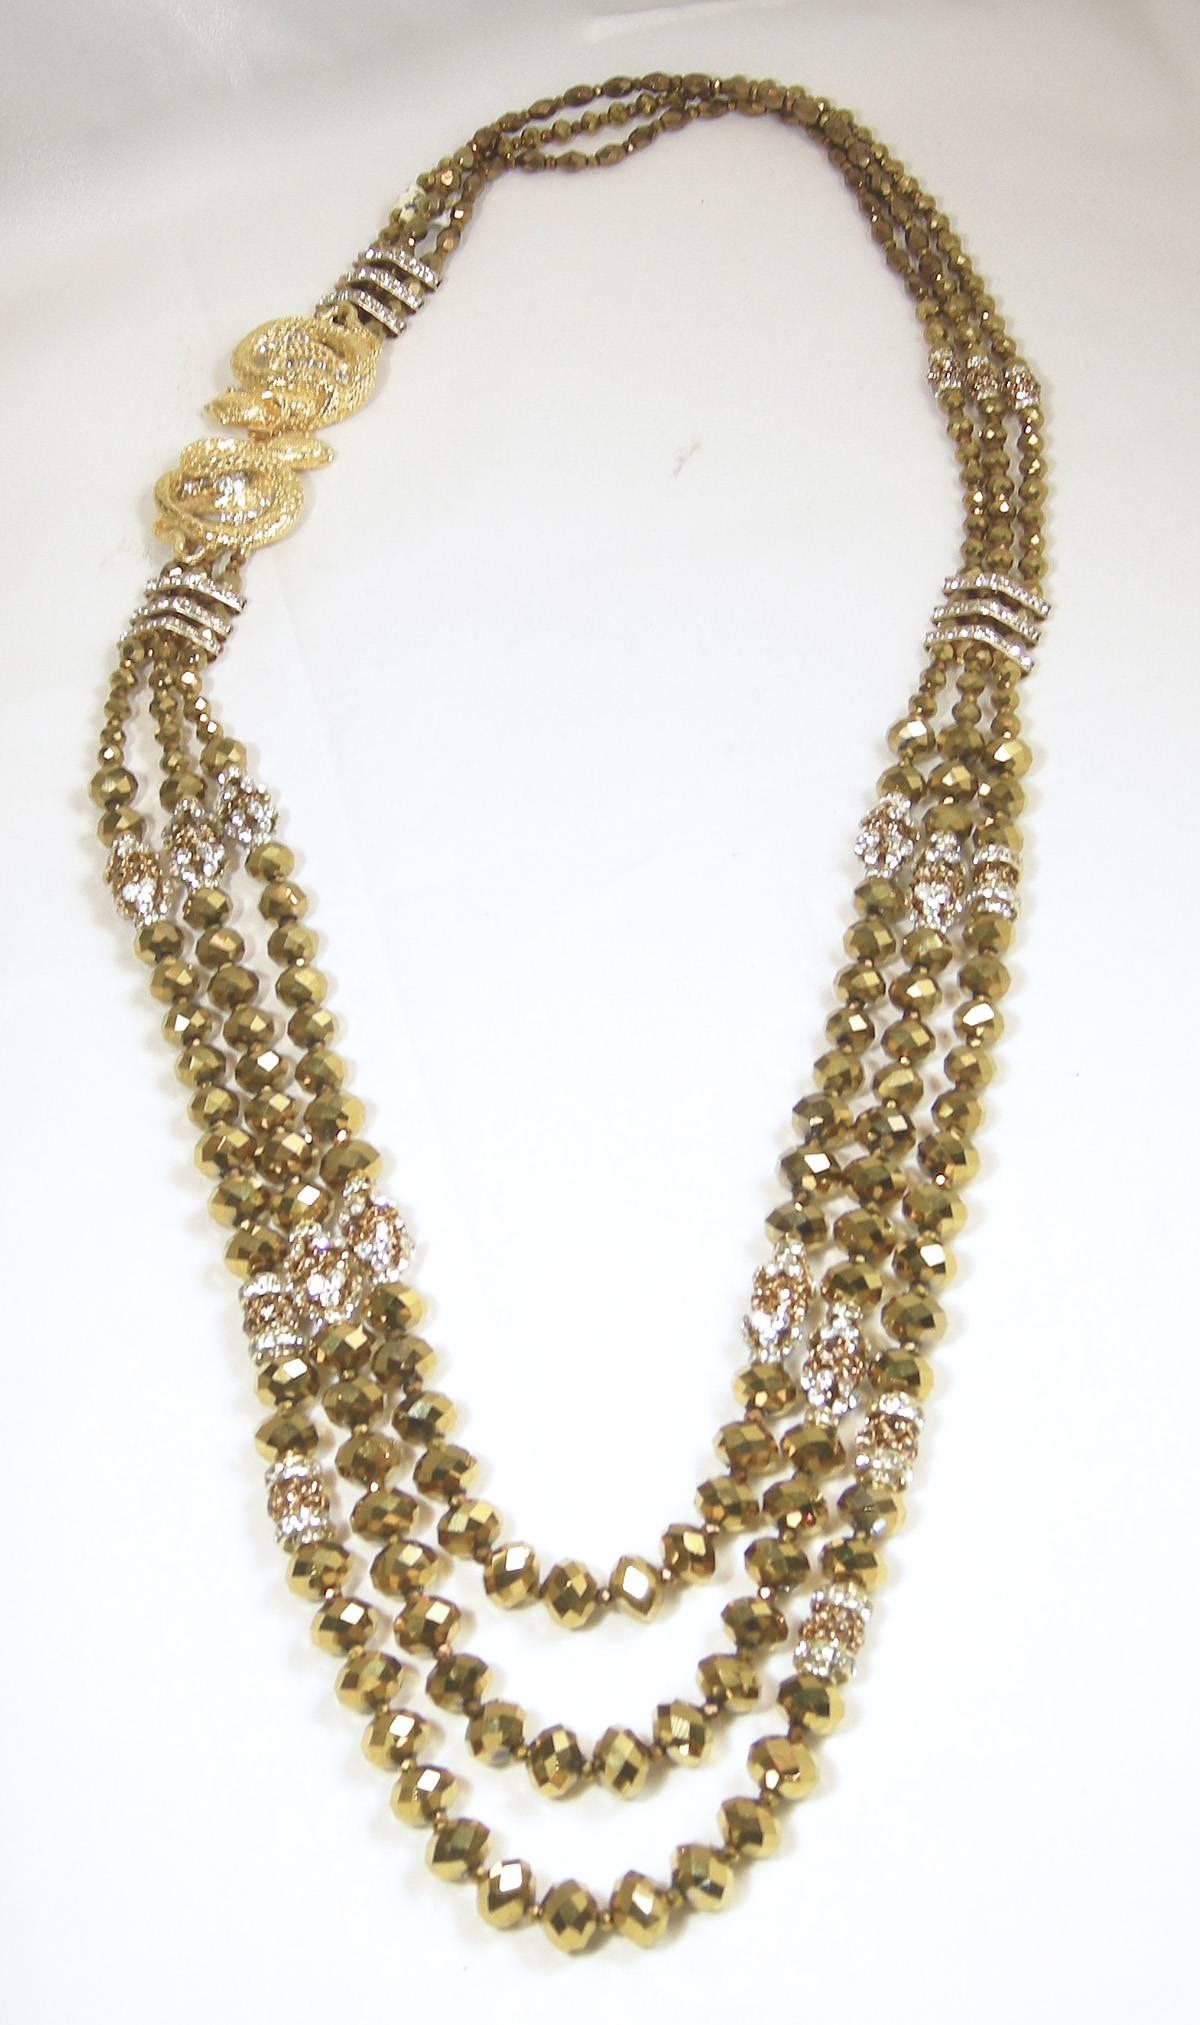 This one-of-kind Robert Sorrell necklace is very special.  It has 3 strands of golden glass beads with crystal bars connecting the rows of beads. The crystal snake has a slide-in clasp enabling you to wear this necklace with the snake on the side. 